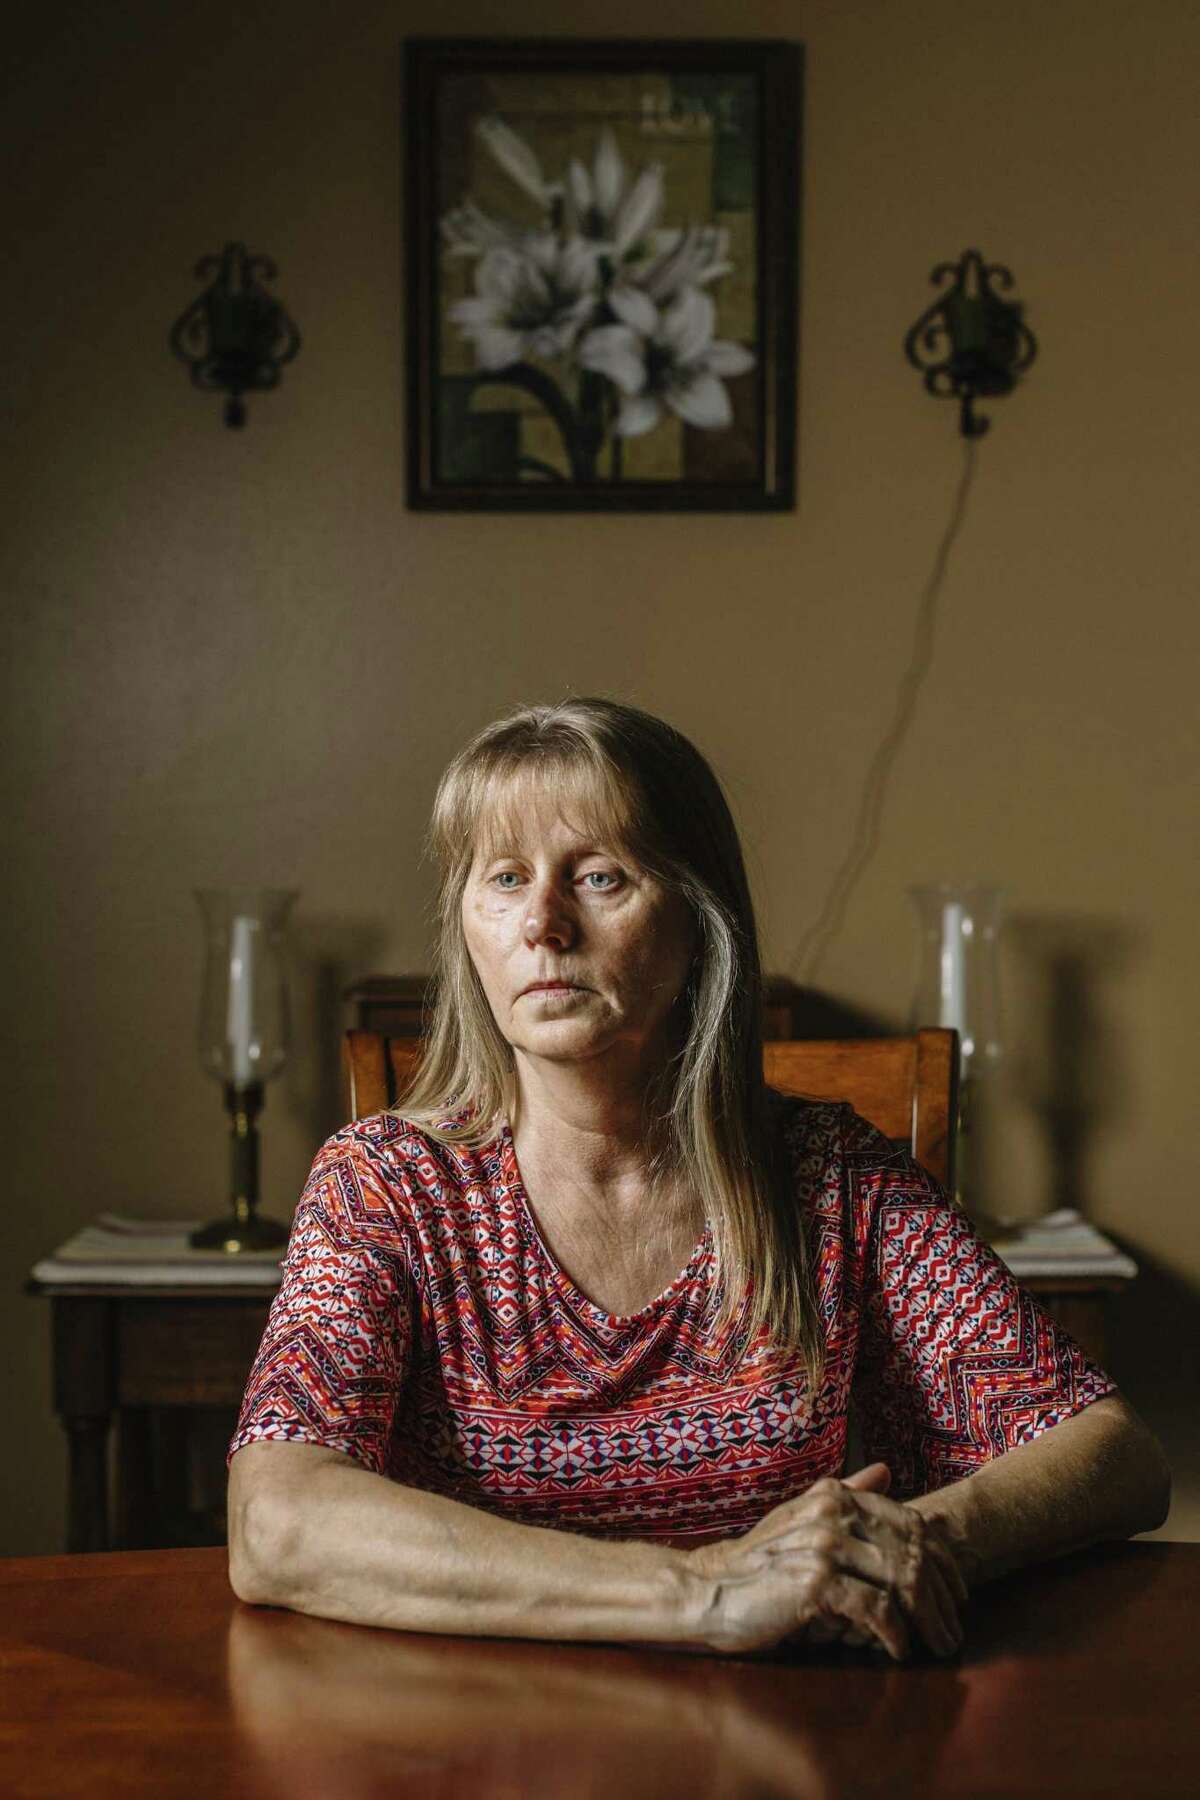 Former Walmart employee Gina Pitre in her home in Biloxi, Miss., April 25, 2018. Pitre is suing Walmart after she said she reported harassment by her store manager and the company failed to do anything about it.